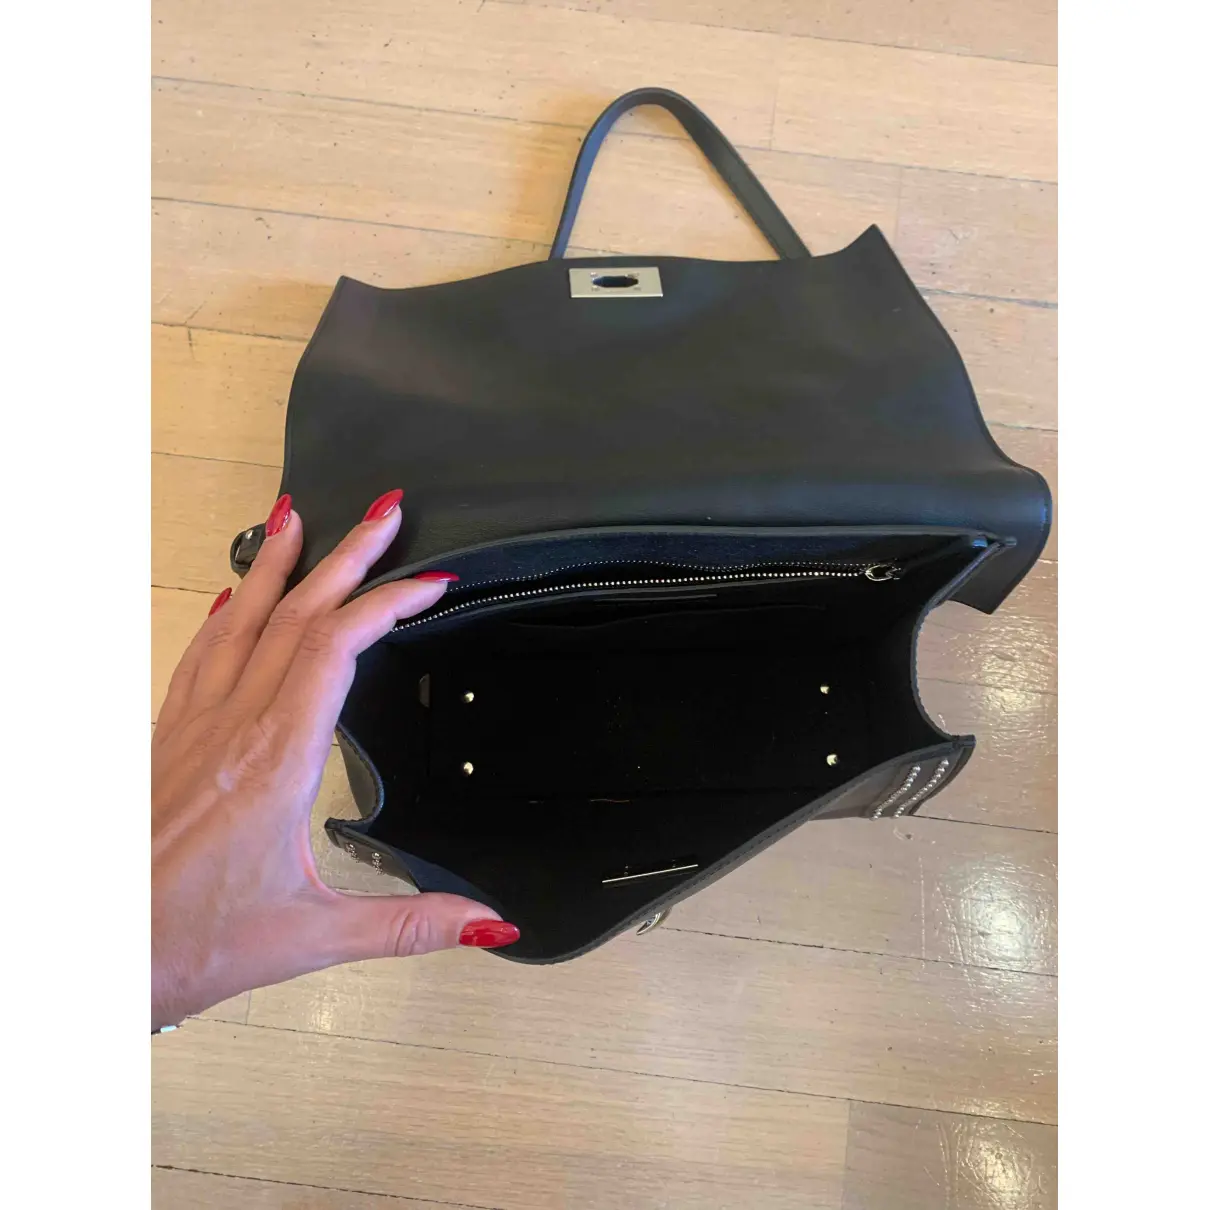 Shark leather tote Givenchy